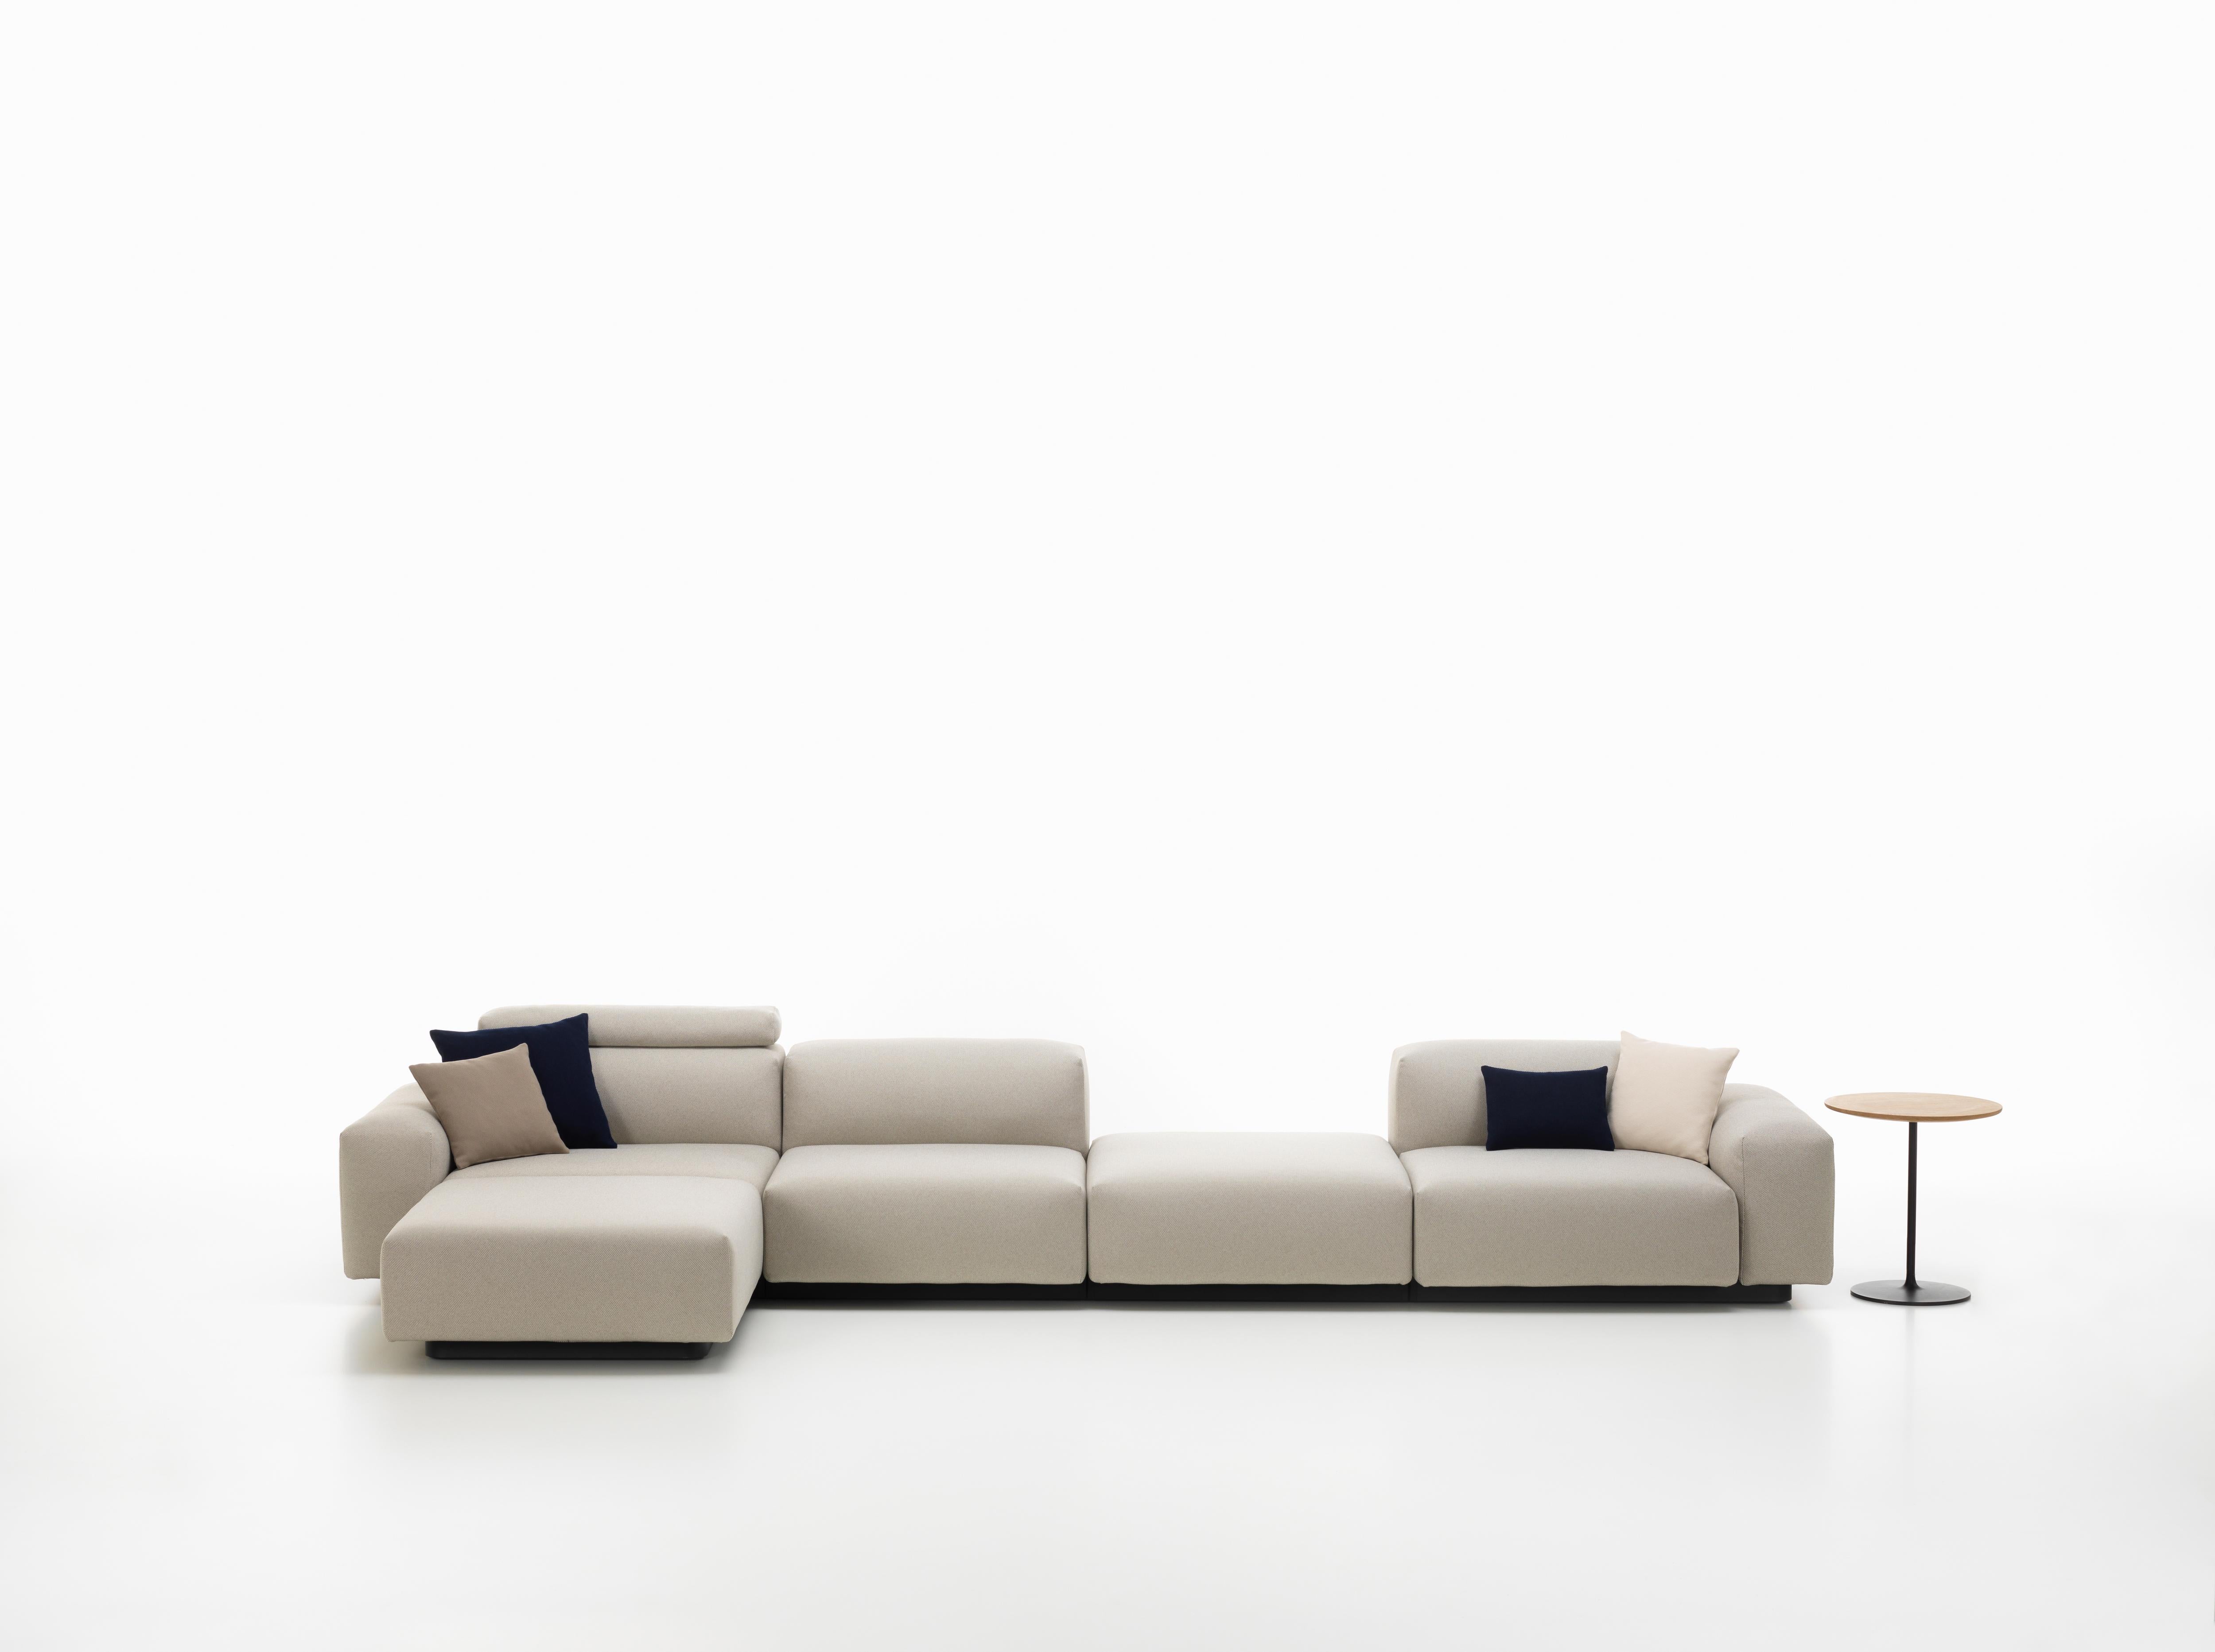 These items are only available in the United States.

The Soft Modular sofa is Jasper Morrison‘s updated interpretation of what has become a modern classic: the low-slung modular sofa with a decidedly horizontal emphasis. Uniting carefully